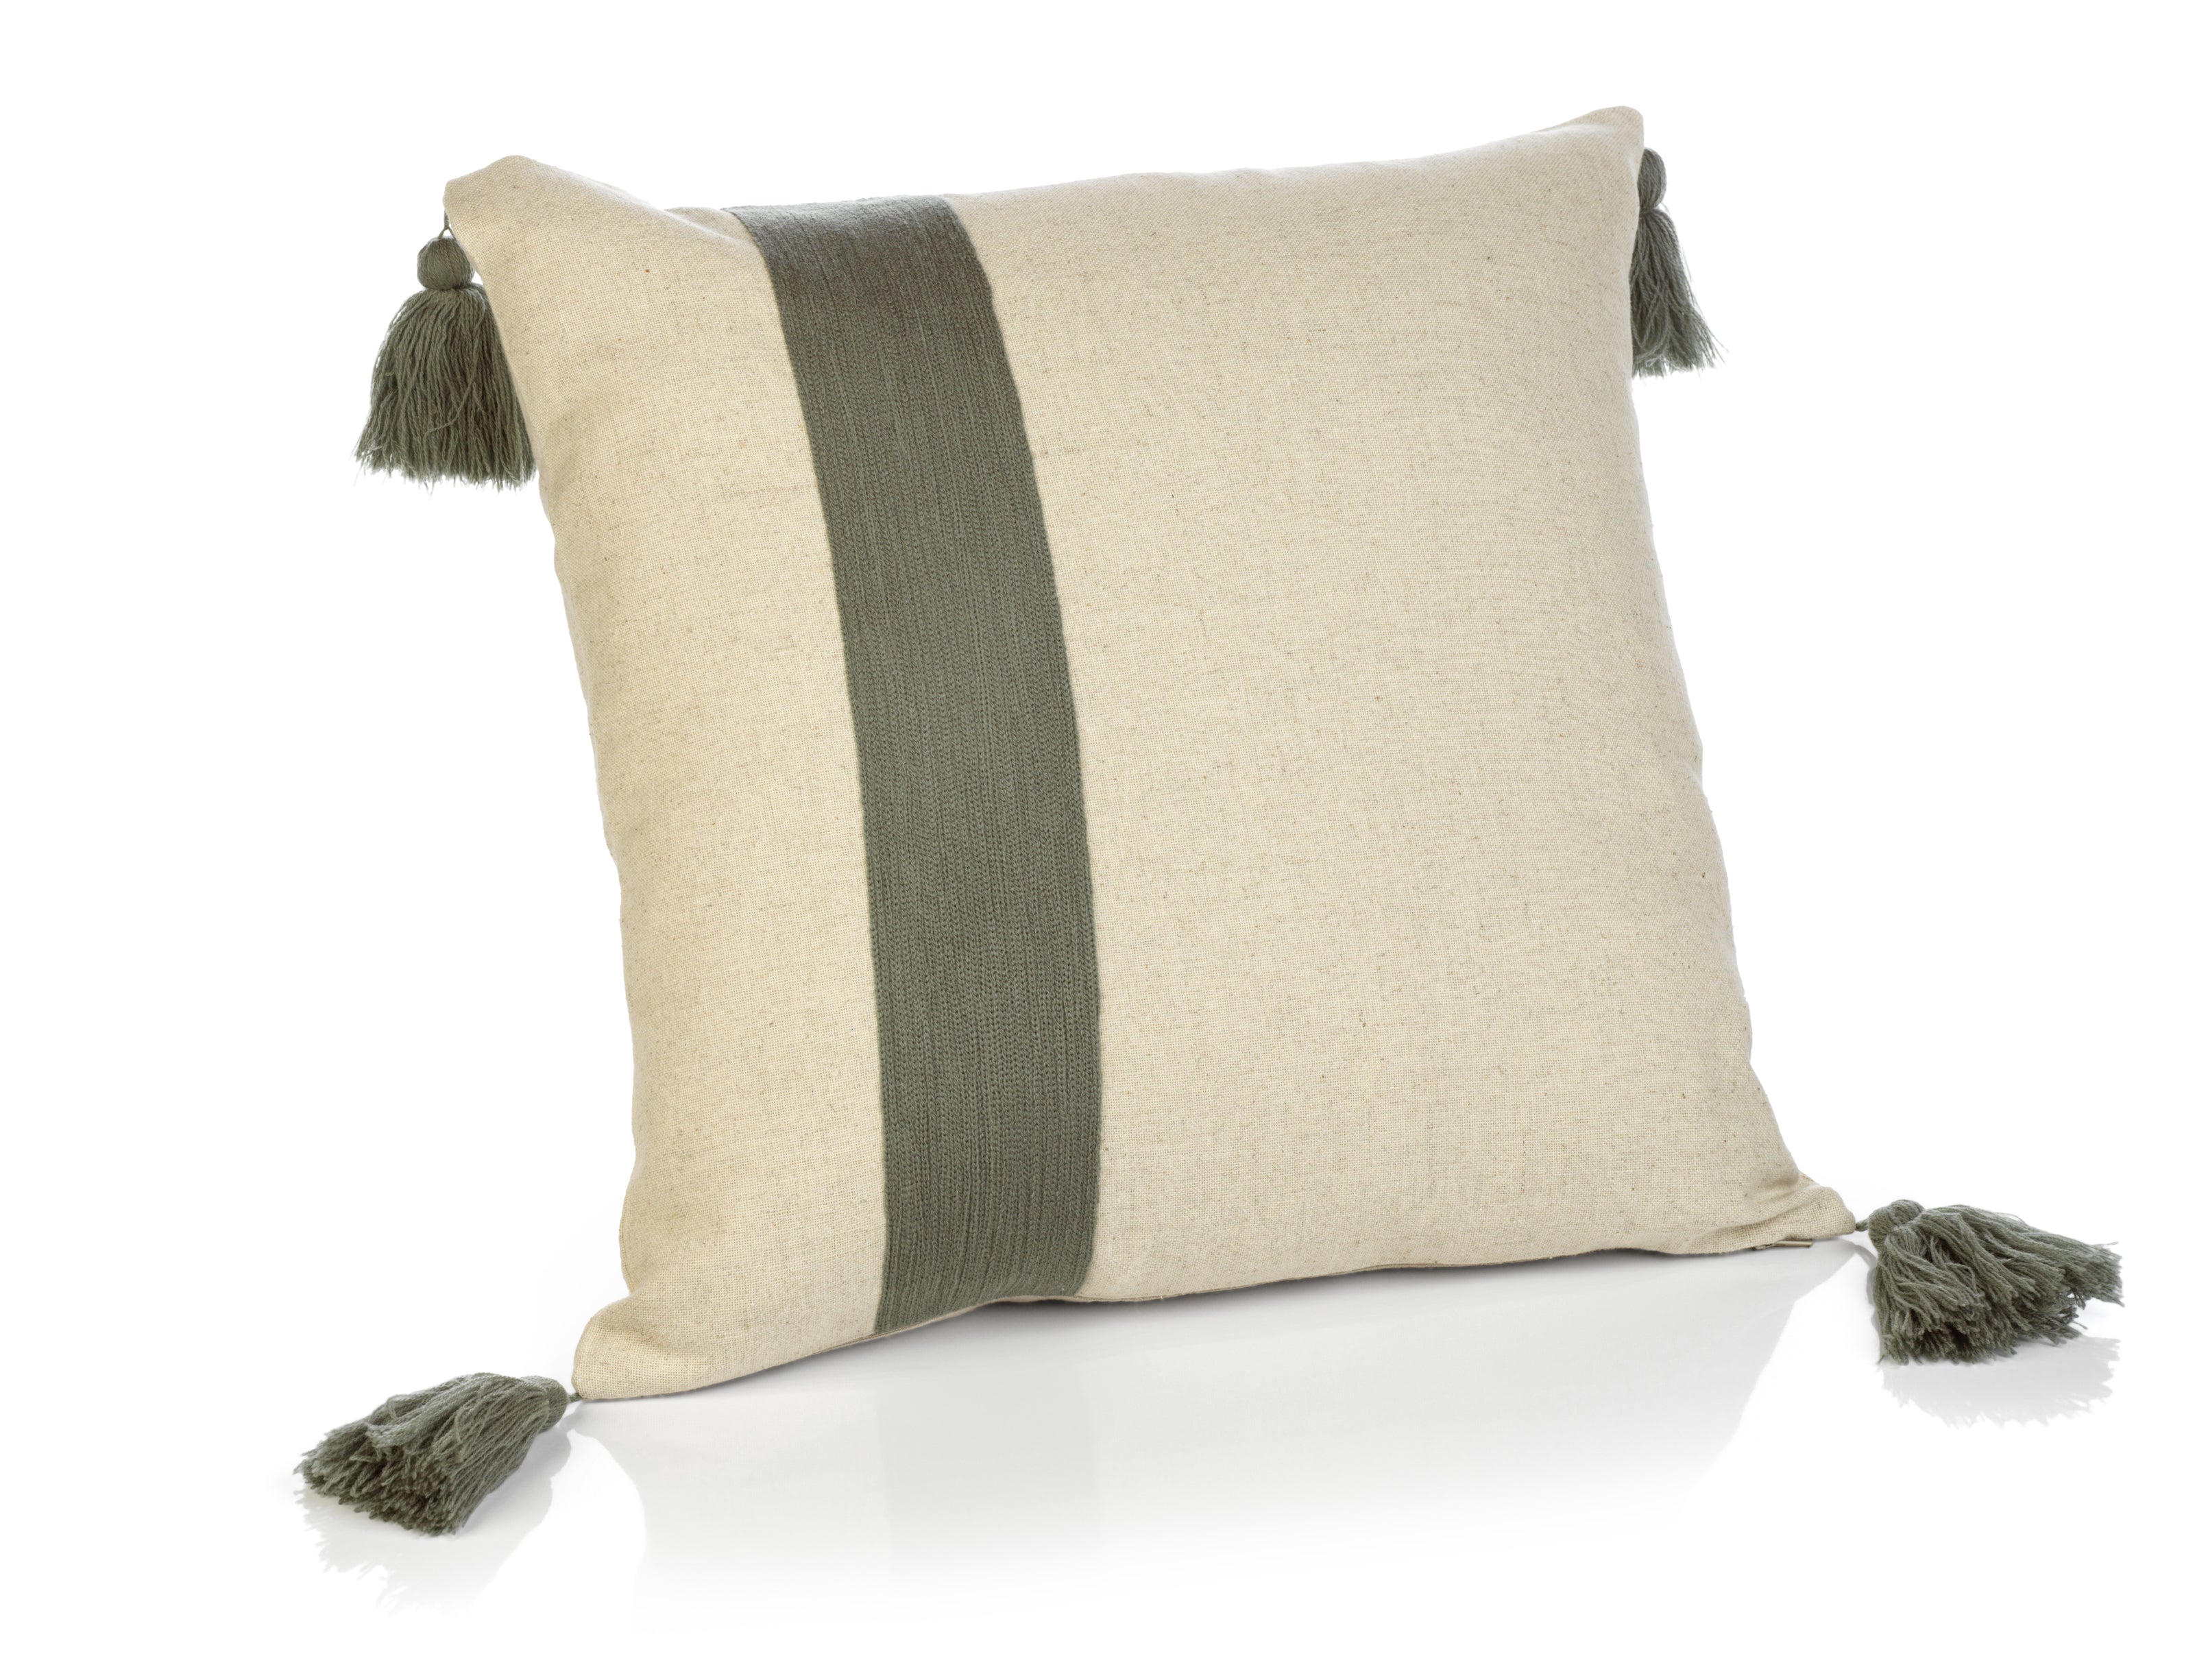 Polignano Embroidered Throw Pillow w/Tassels - Sage - CARLYLE AVENUE